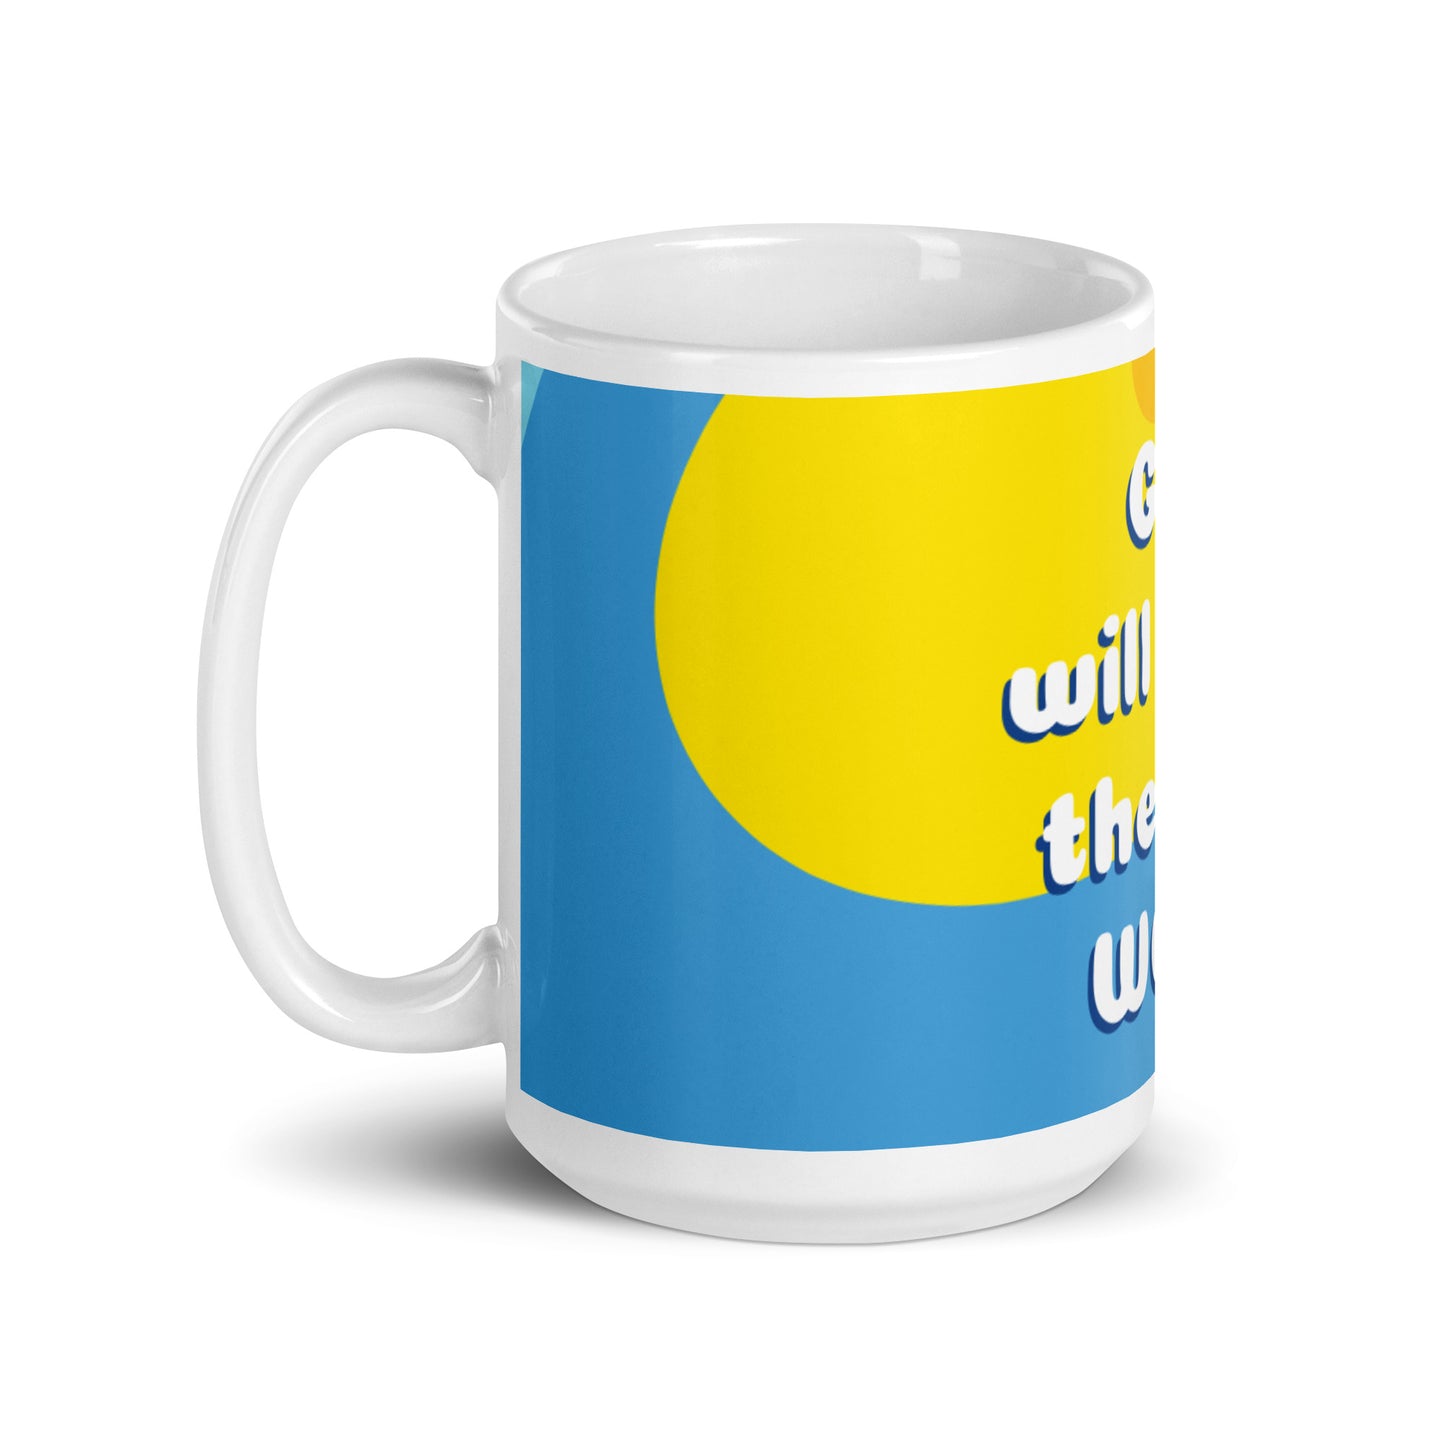 Color Waves White Glossy Mug - God will have the last word